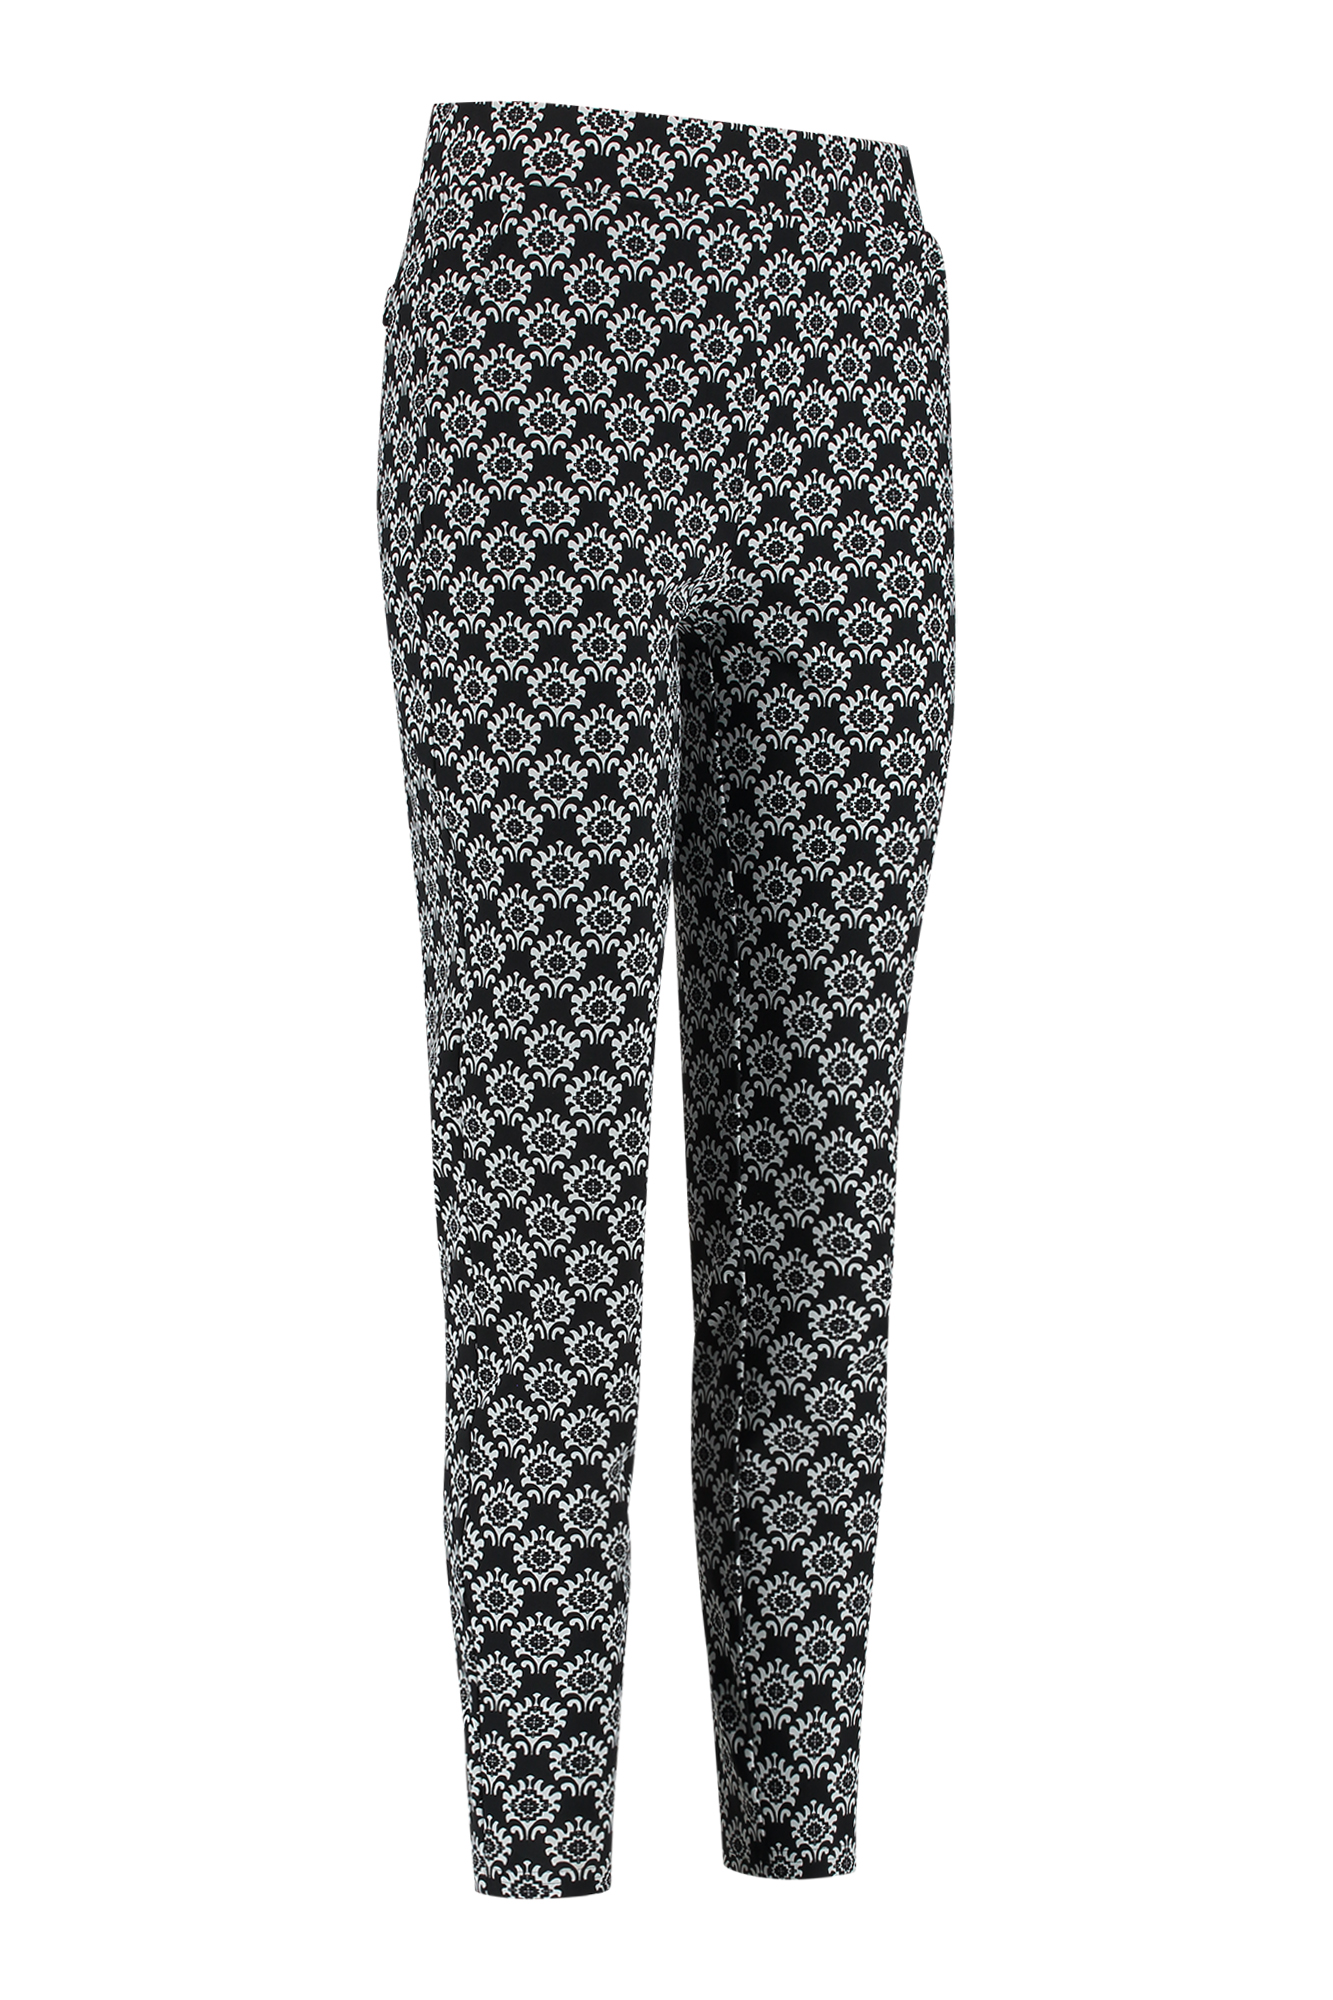 Studio Anneloes Kaat Bonded Ornmt Trousers Black White